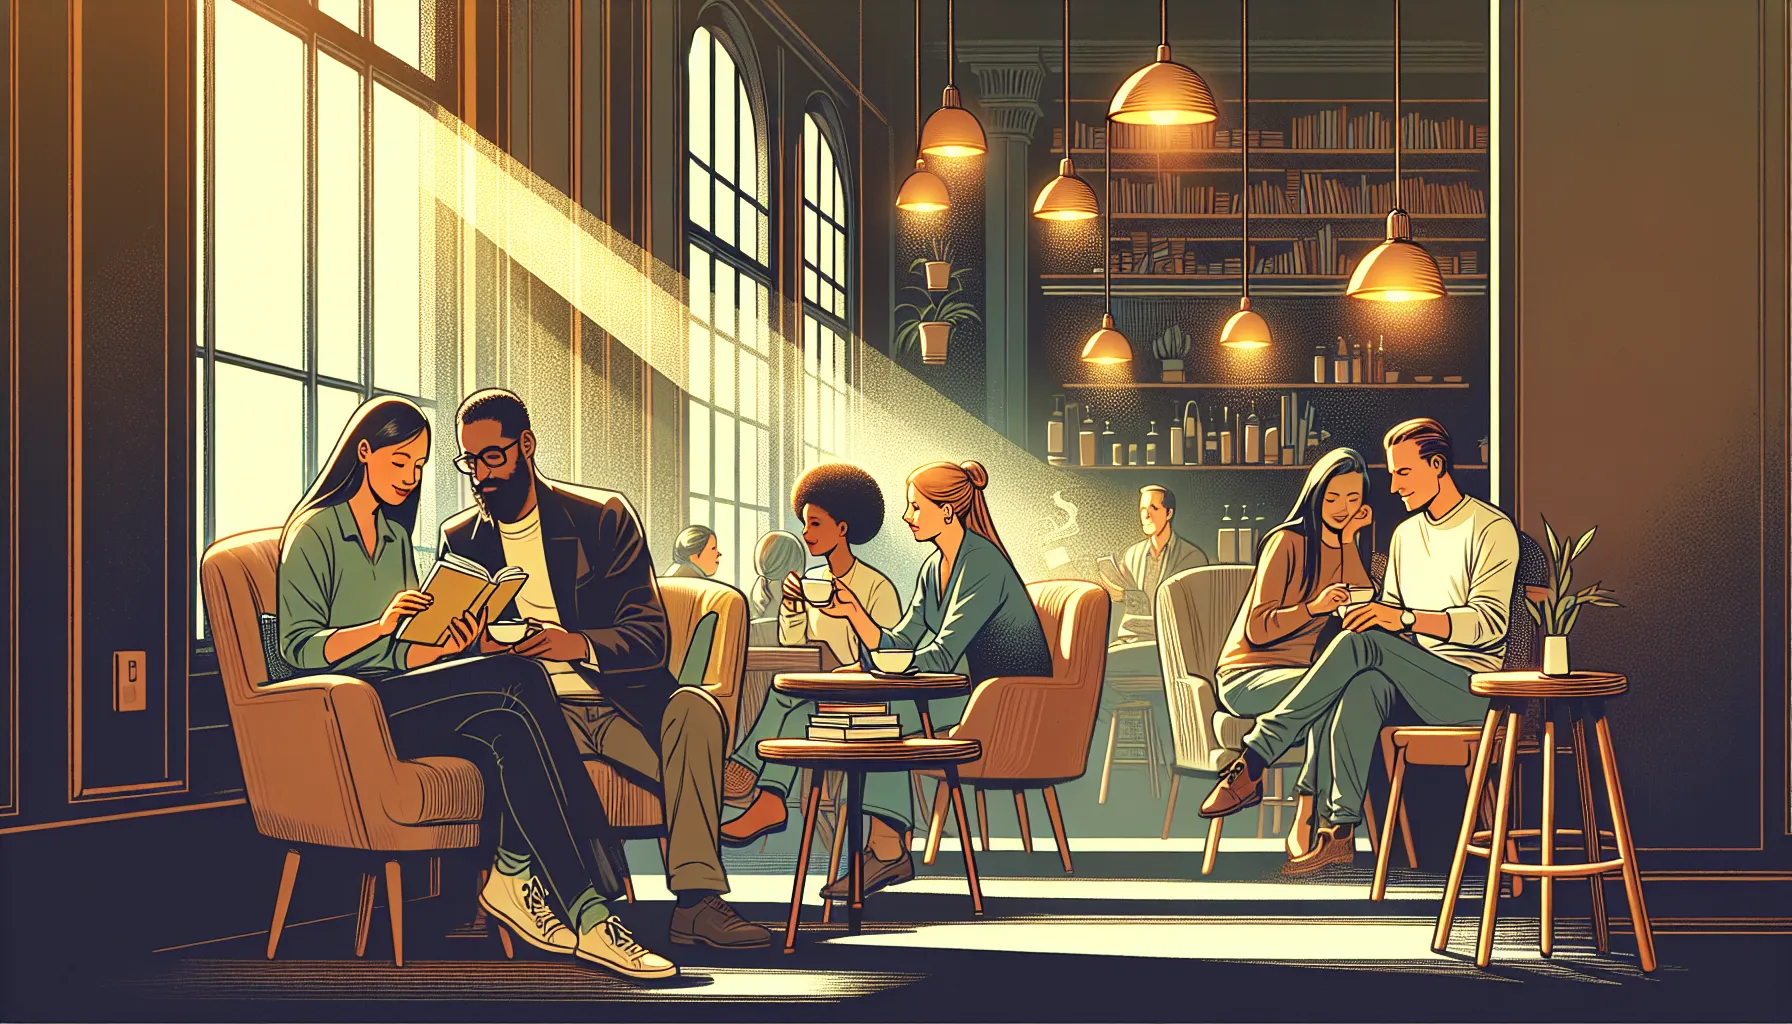 Nestled within the comforting embrace of a bustling café, strangers cross paths, each a potential prelude to a story untold. This image captures the essence of chance encounters that could bloom into shared journeys, framing the magic of ordinary moments where future companions may meet.